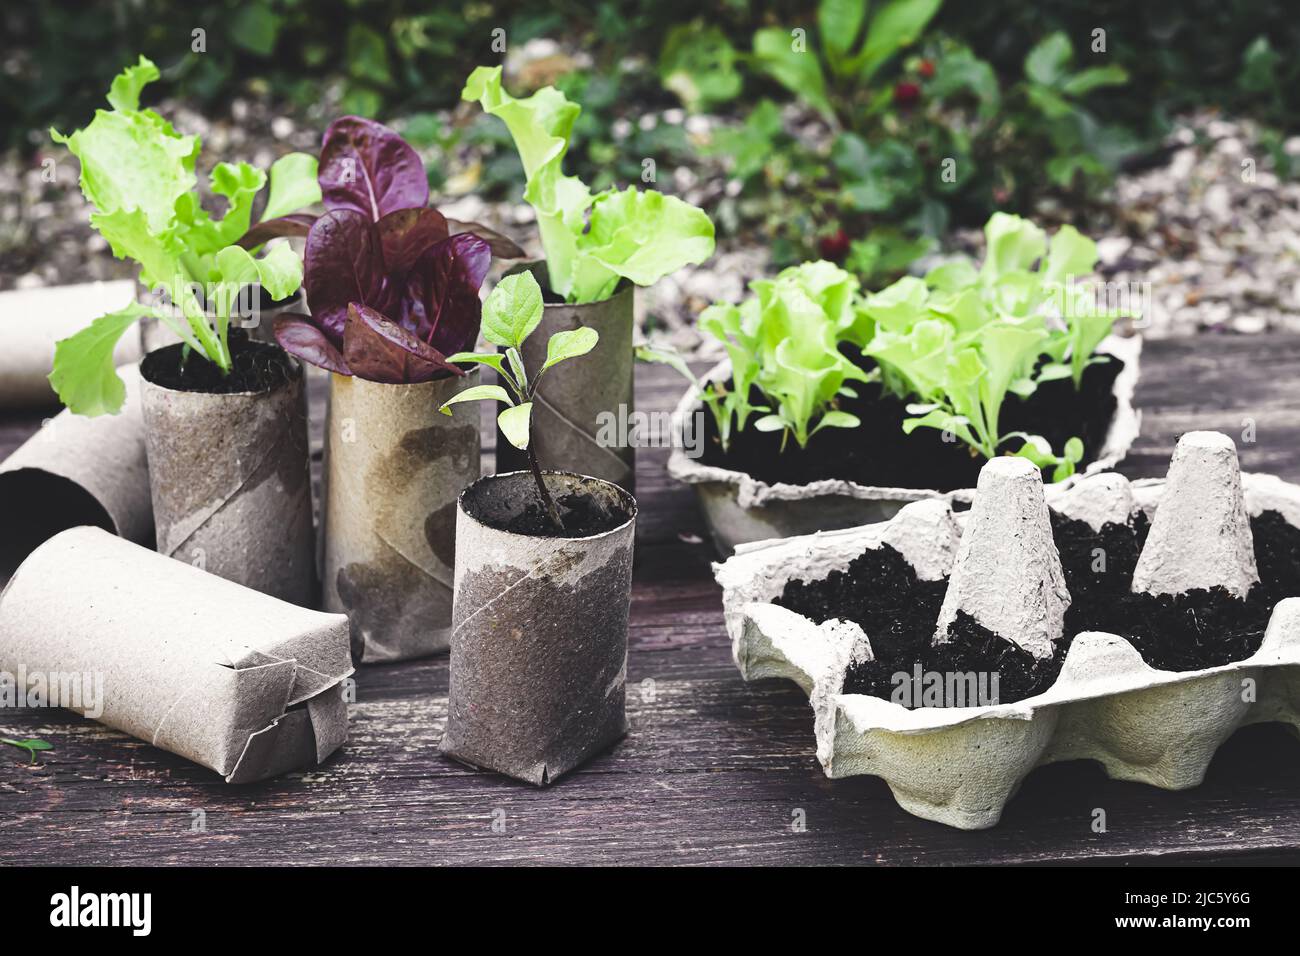 Seedlings in biodegradable pots made of toilet roll inner tubes and reused egg boxes, environmentally friendly living, zero waste concept Stock Photo